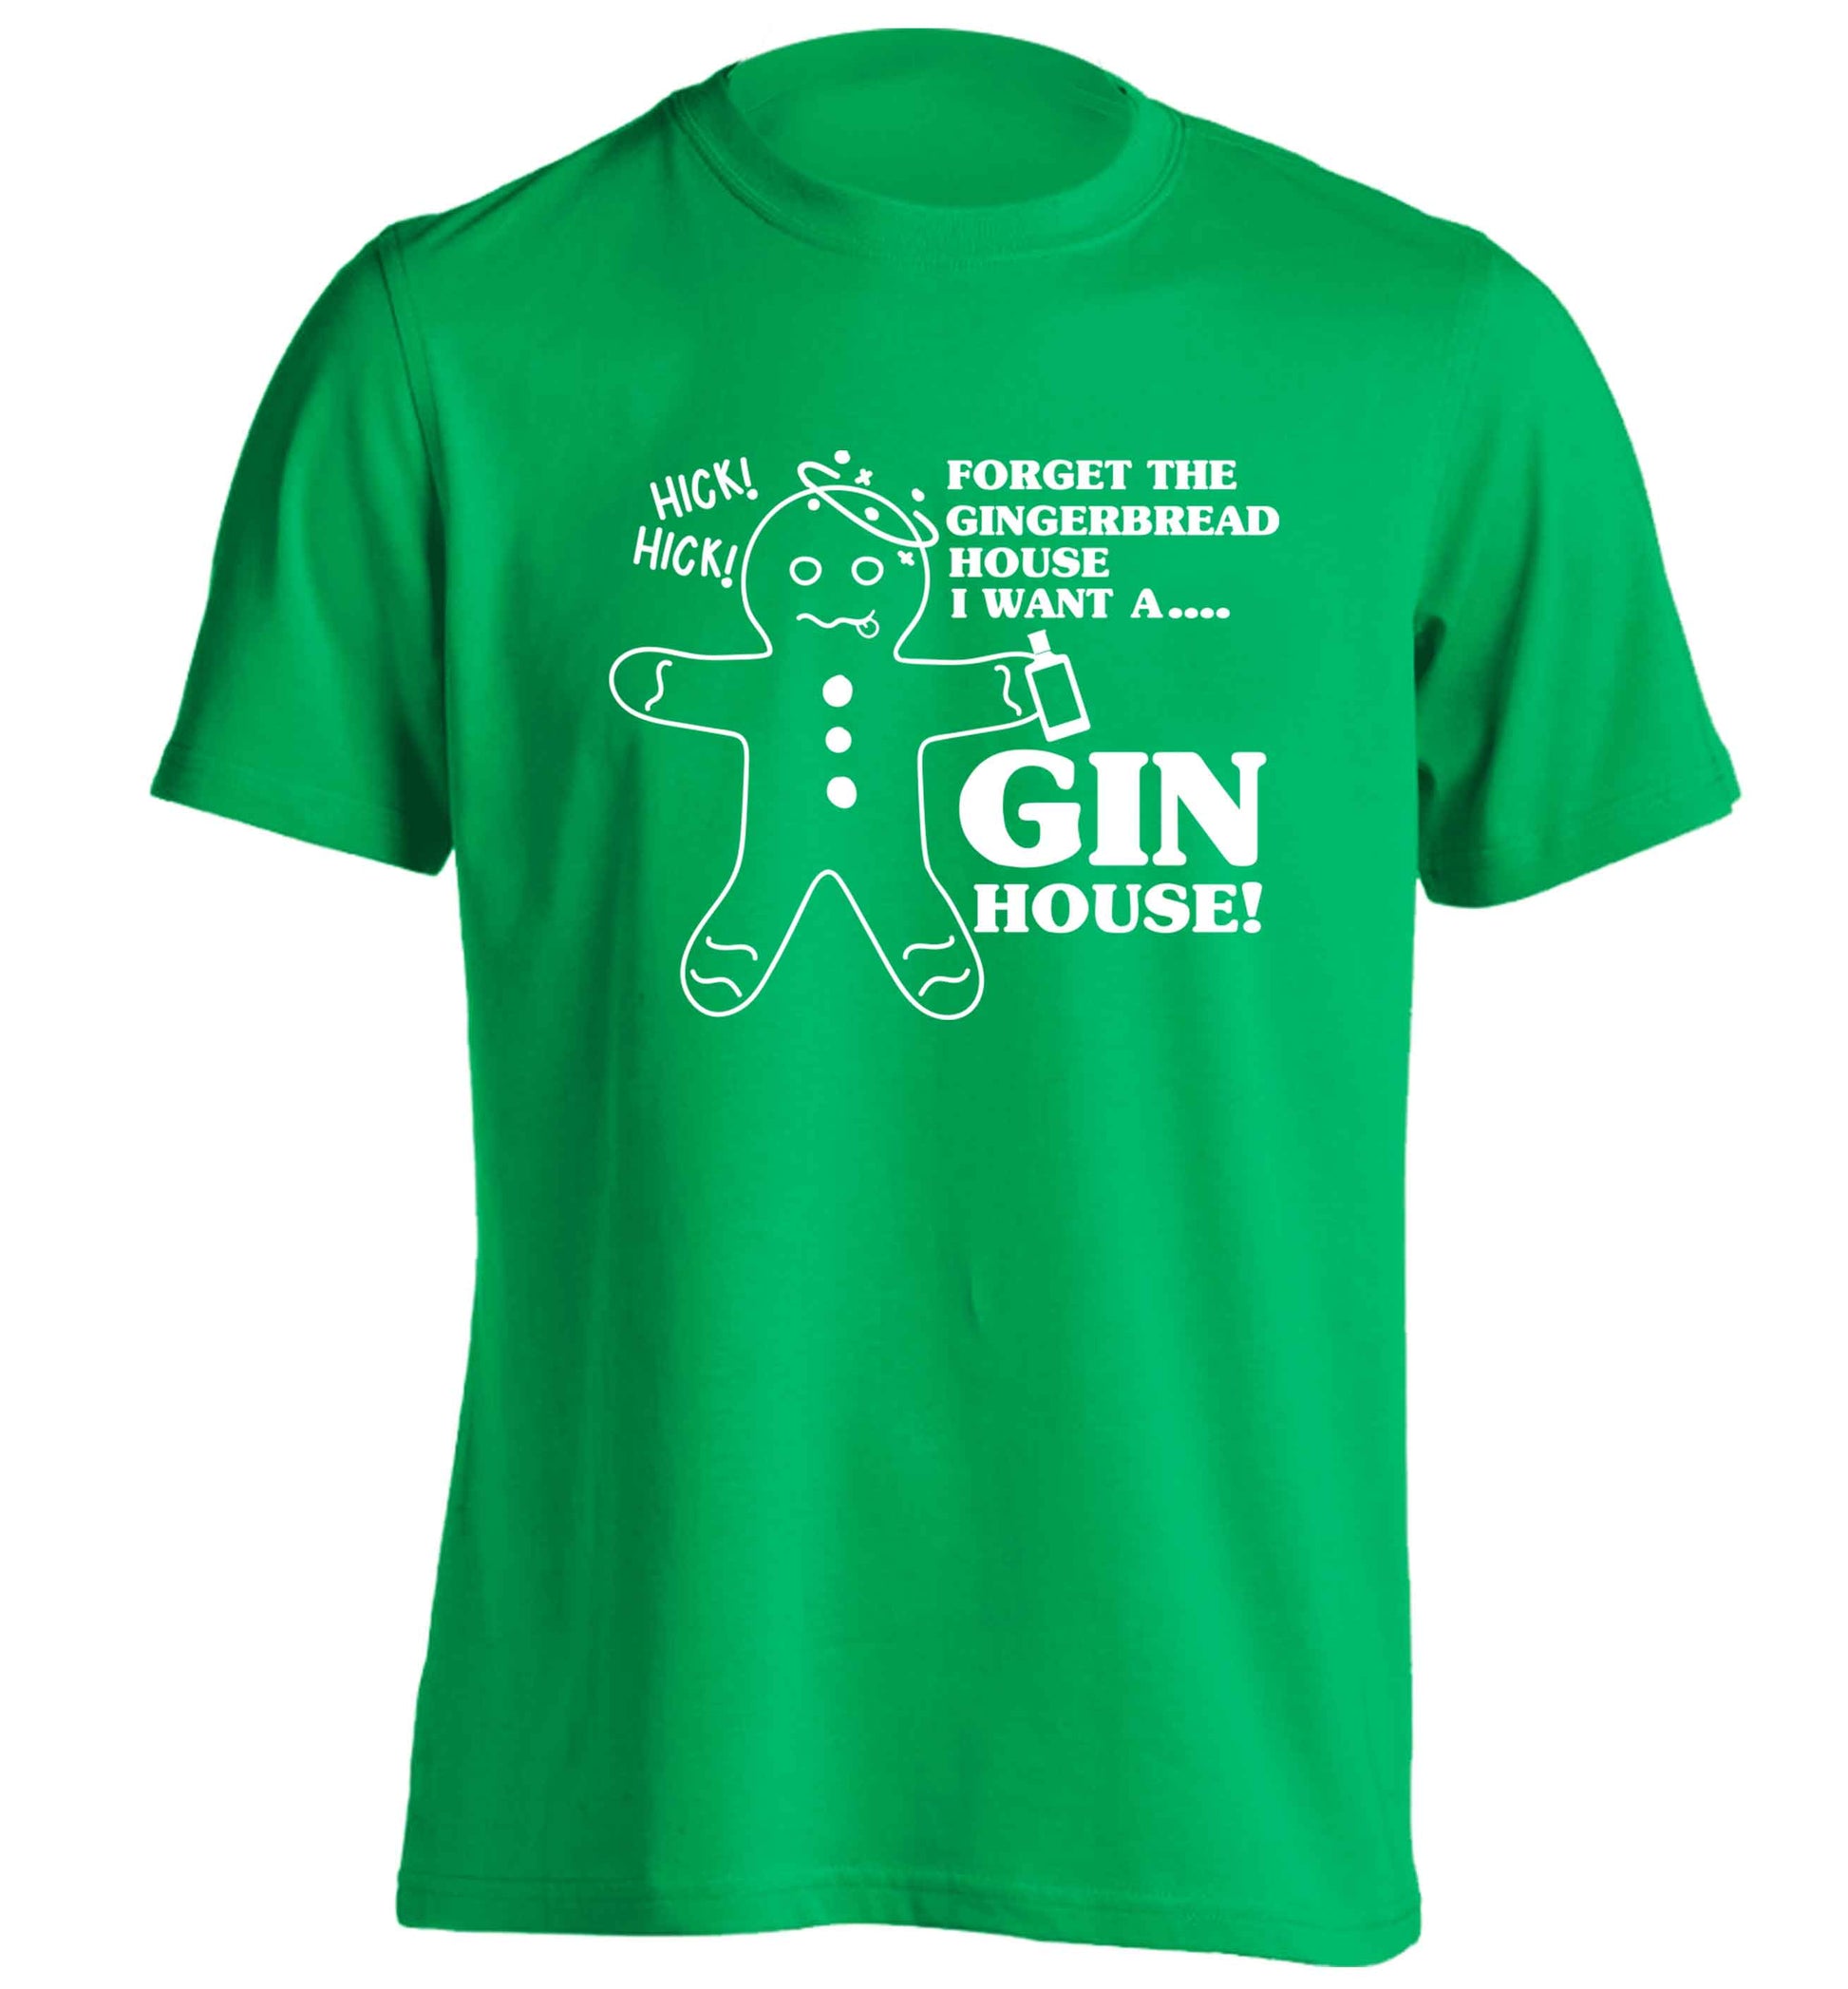 Forget the gingerbread house I want a gin house adults unisex green Tshirt 2XL